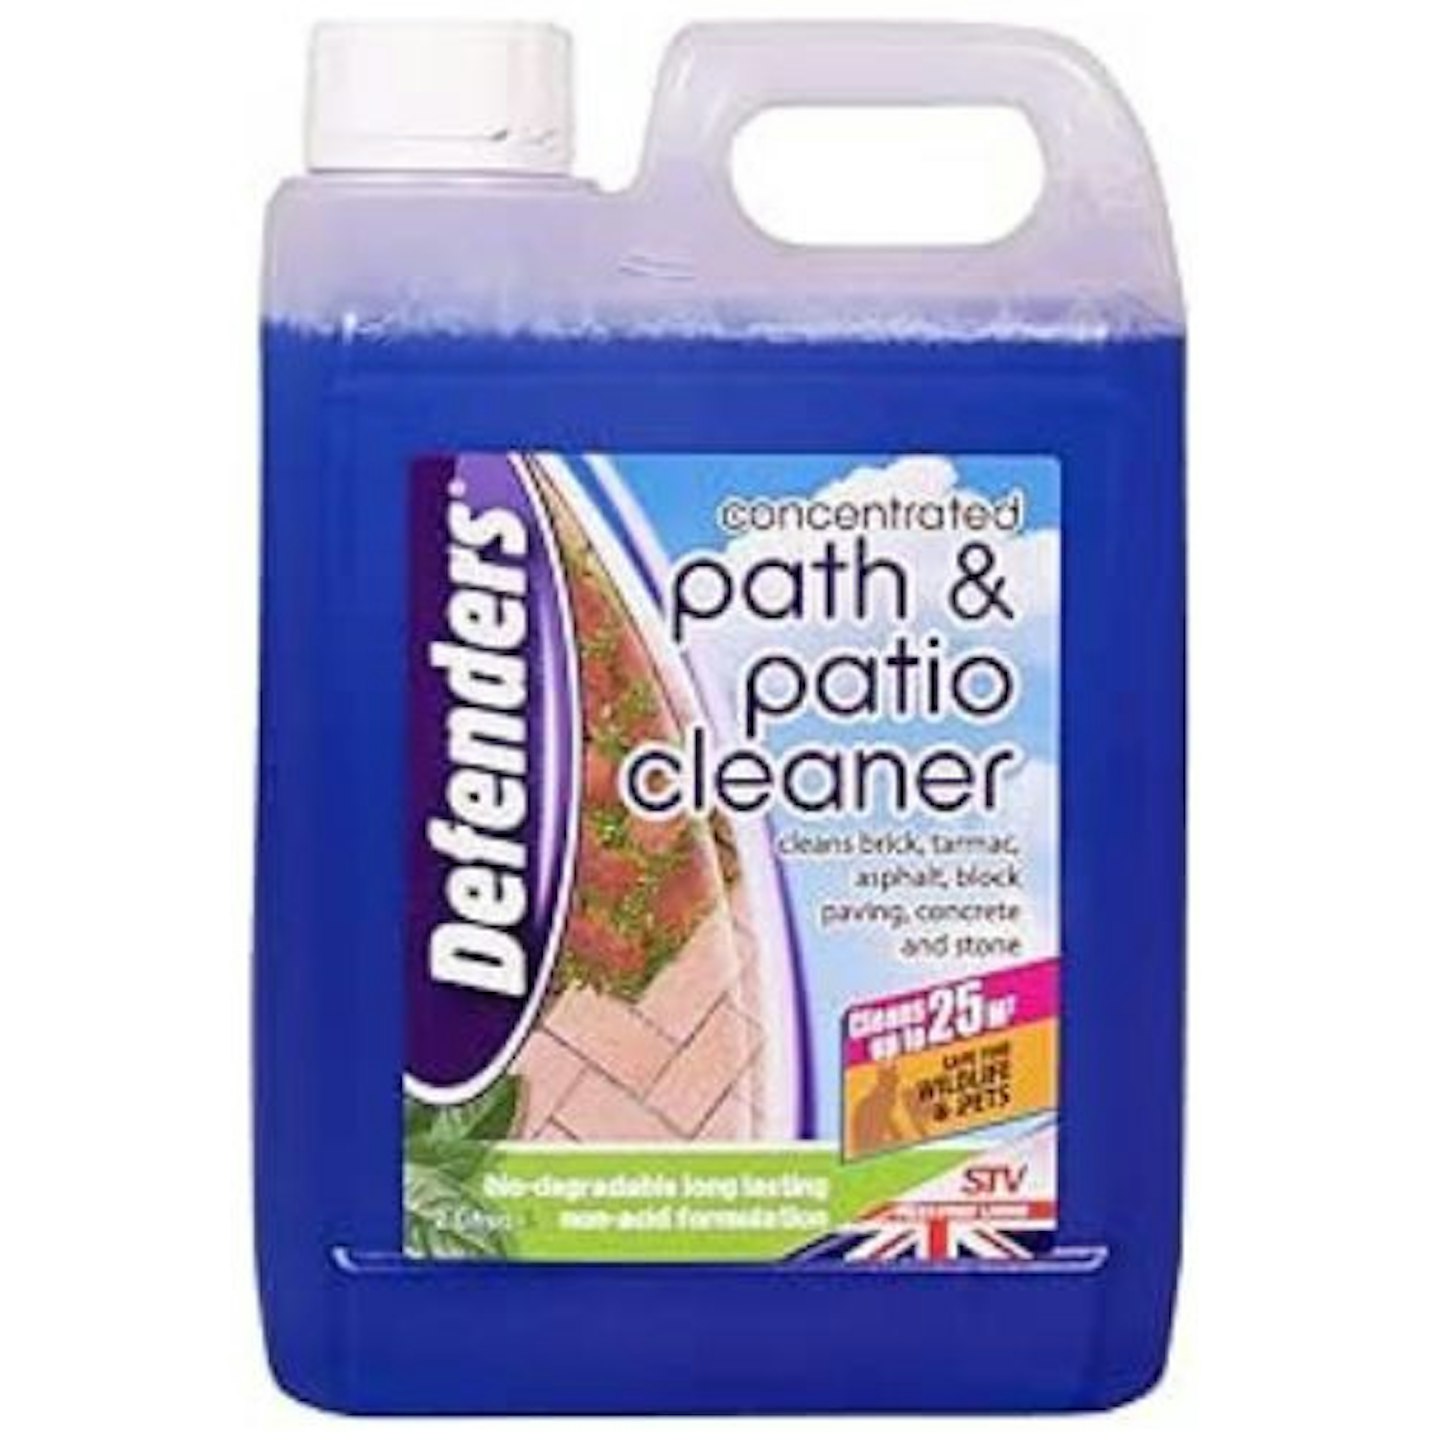 Defenders Concentrated Path and Patio Cleaner